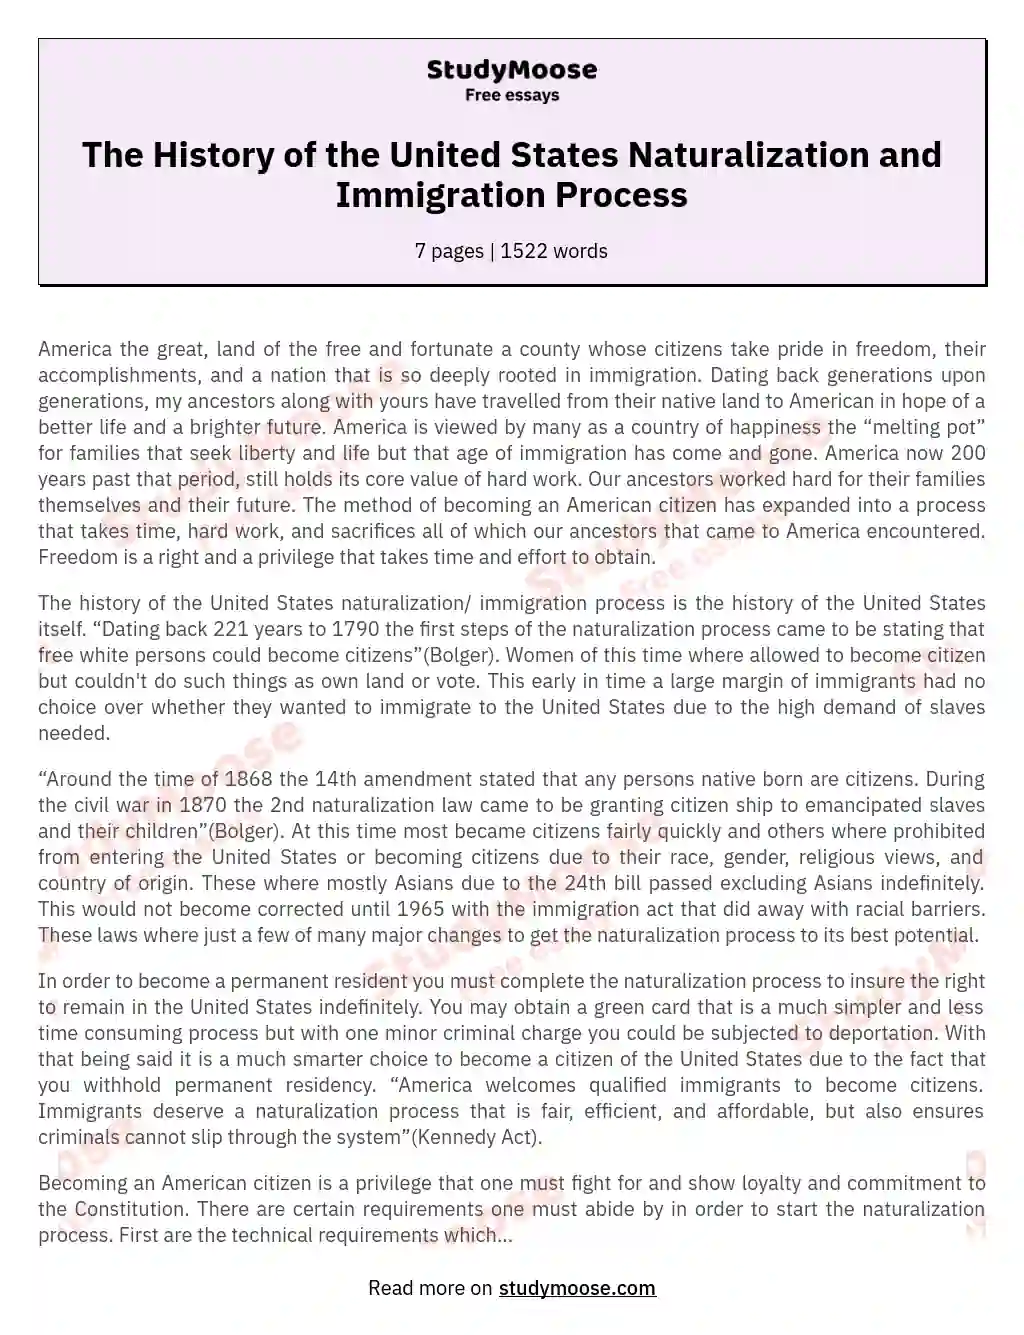 The History of the United States Naturalization and Immigration Process essay